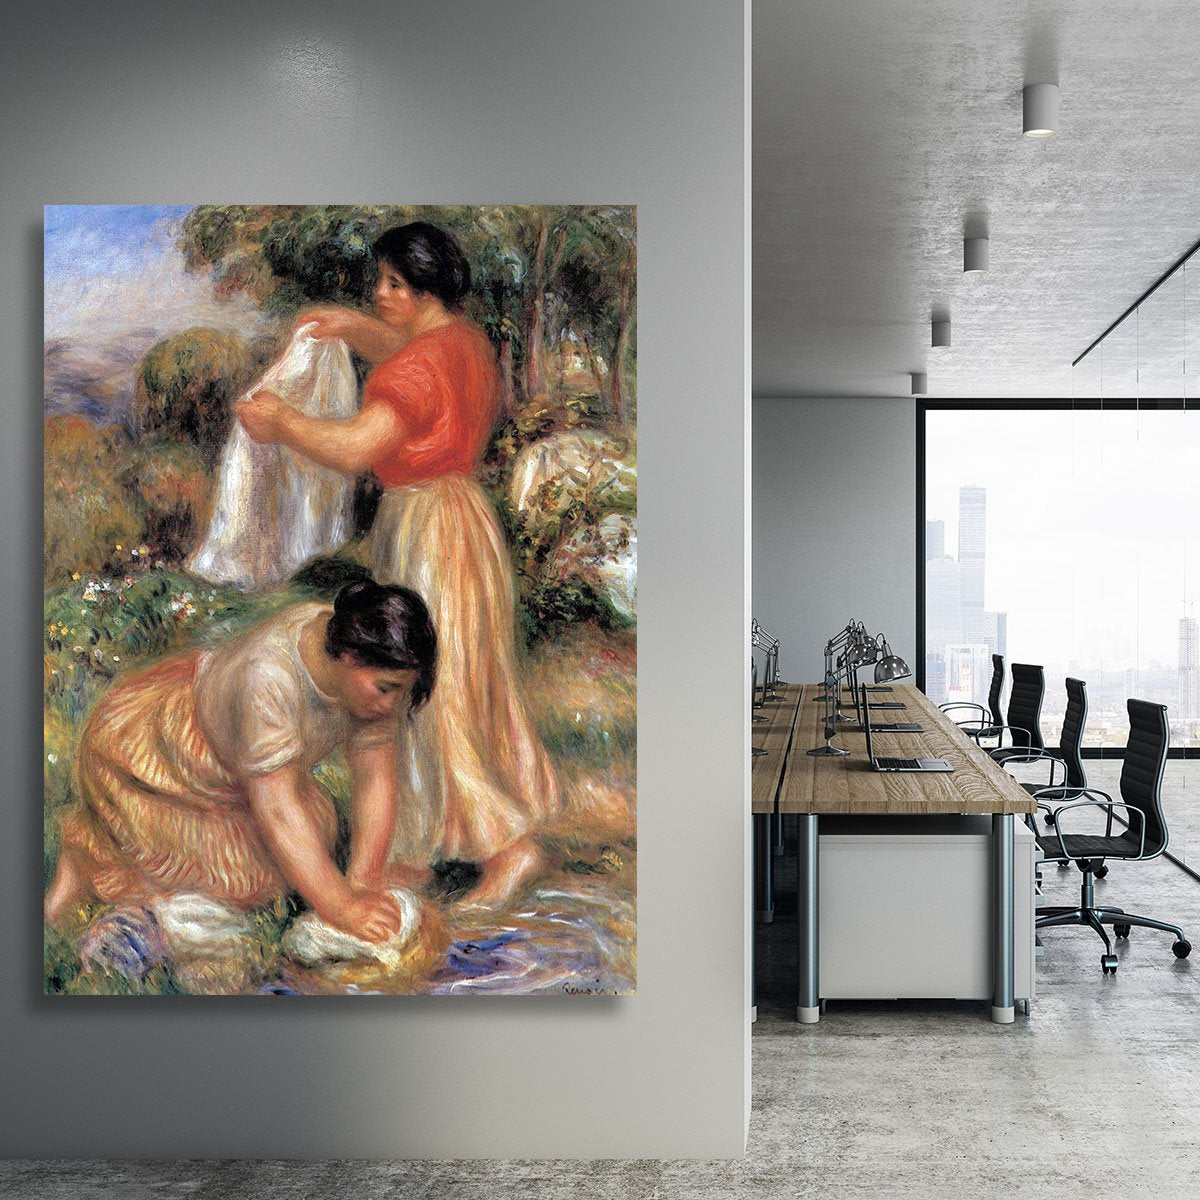 Laundresses 2 by Renoir Canvas Print or Poster